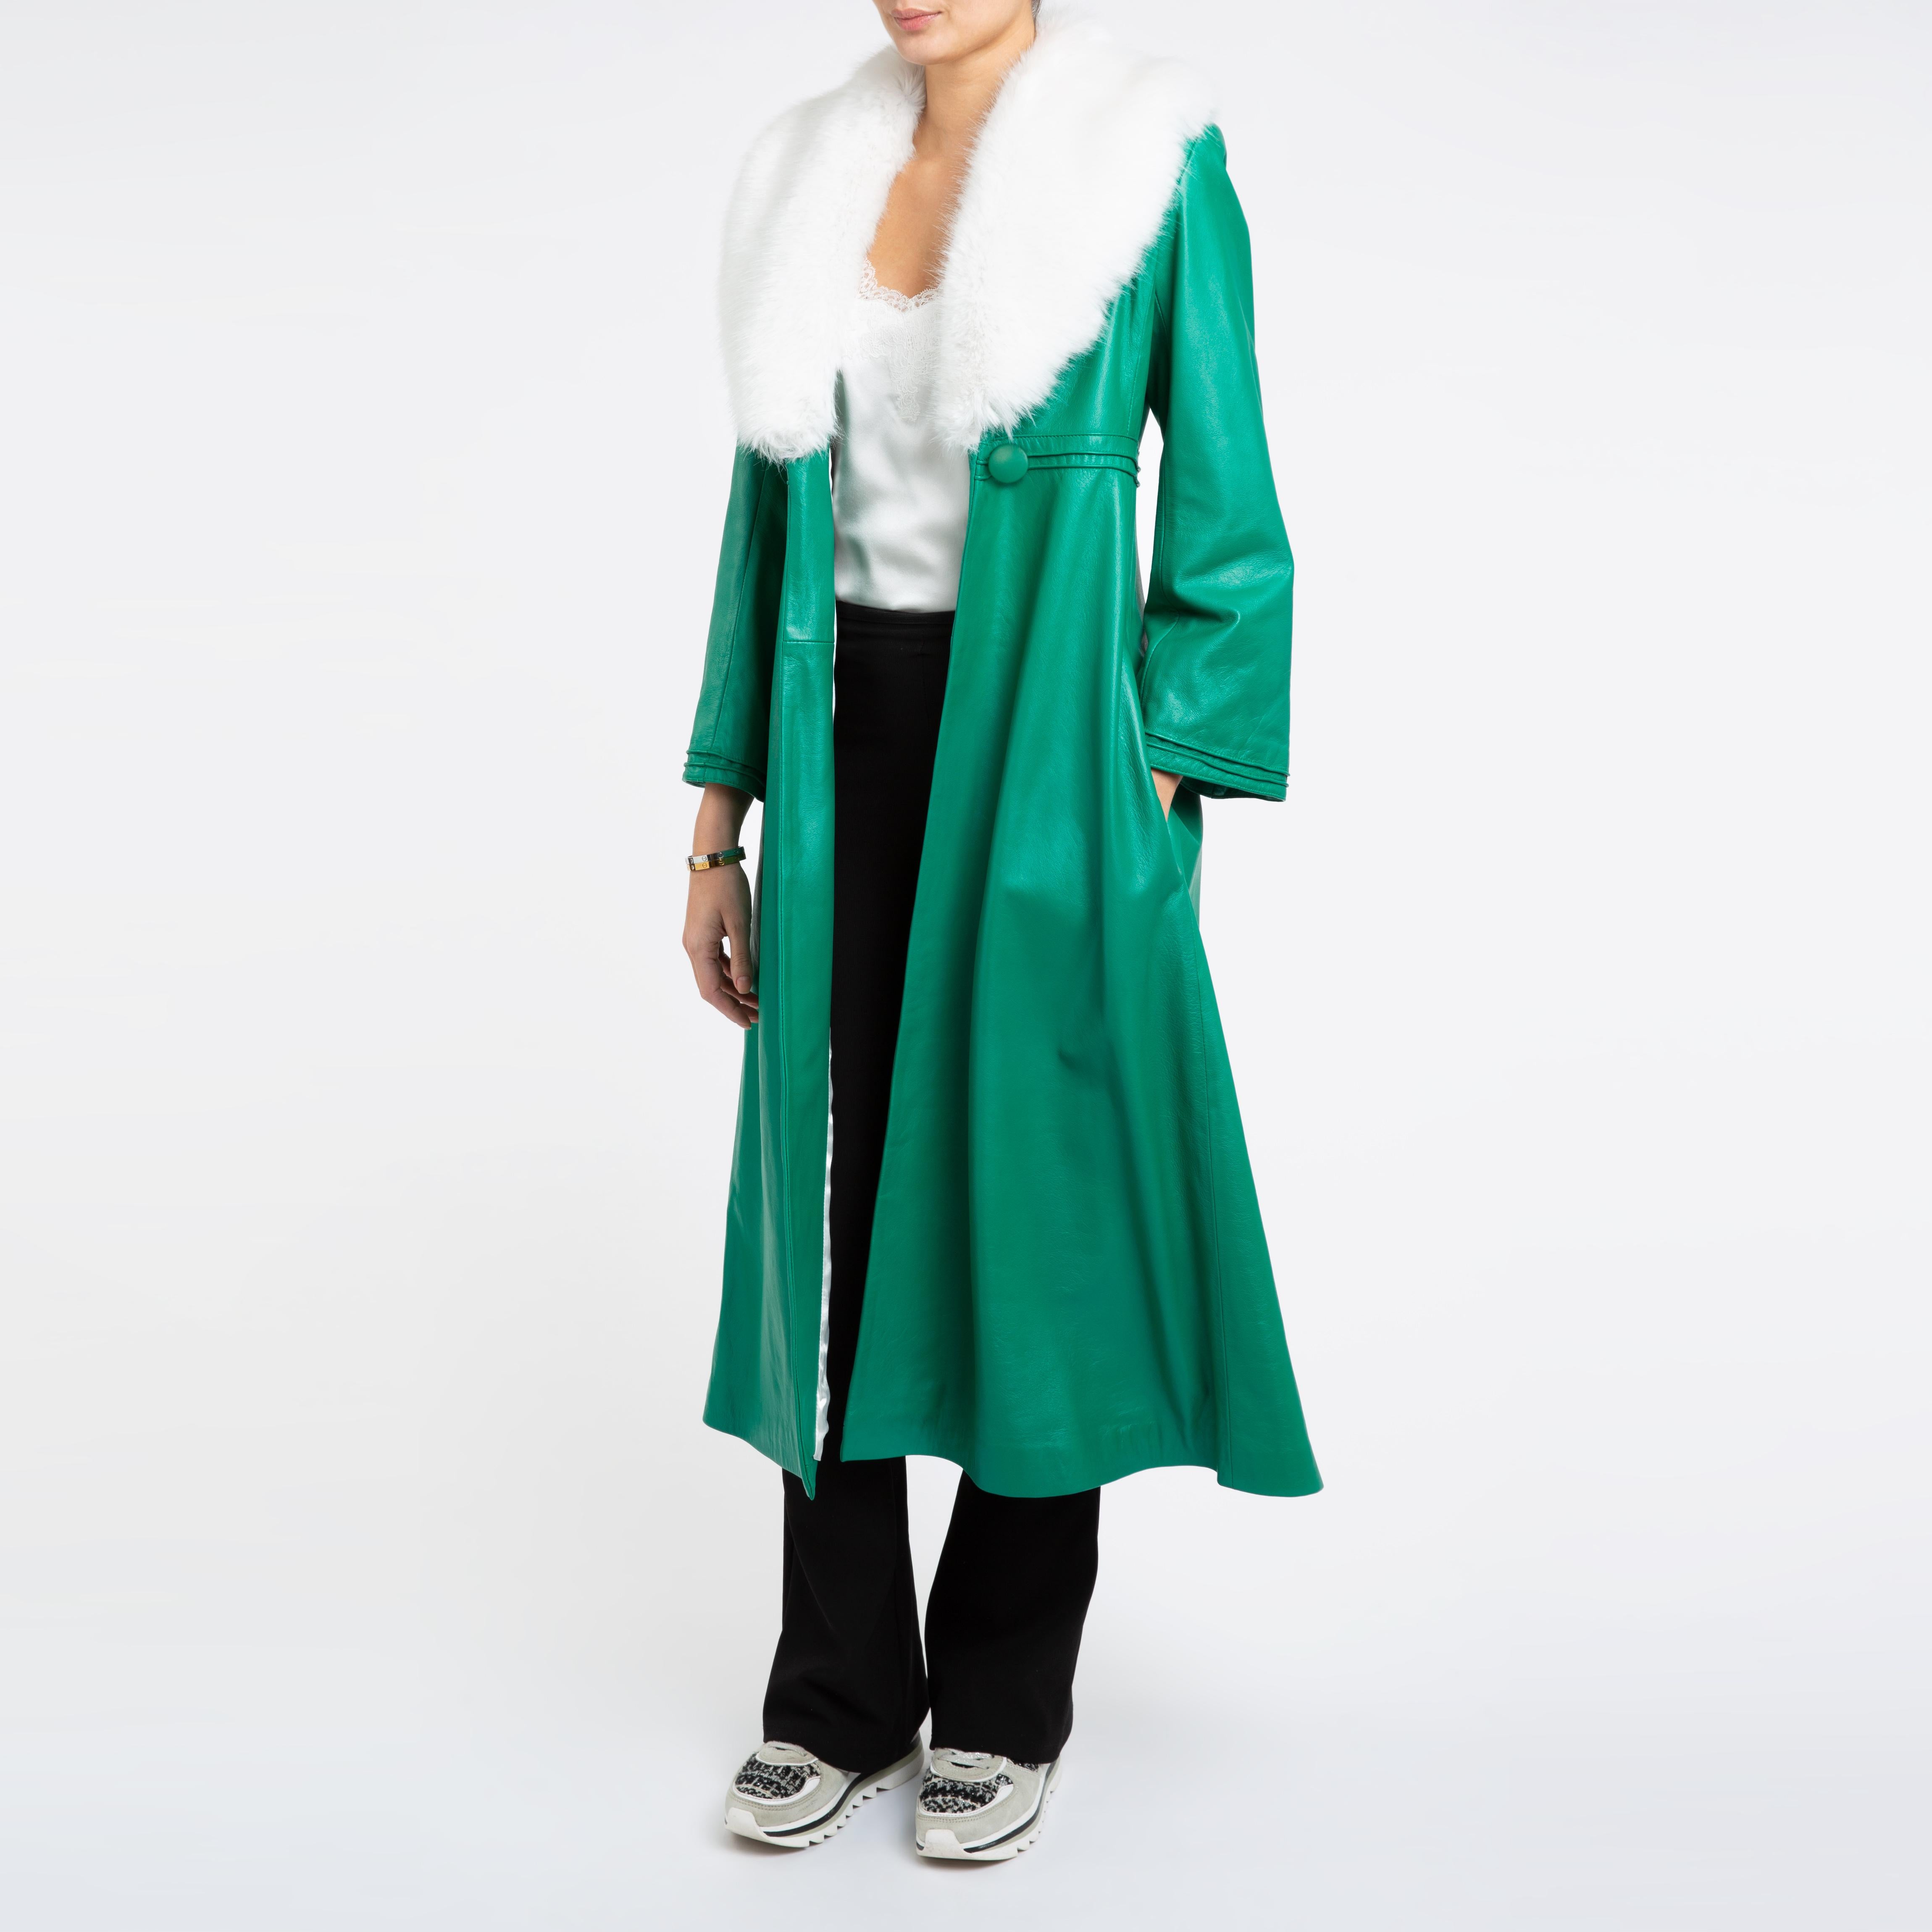 Verheyen London Edward Leather Coat in Green & White Faux Fur - Size 8 UK 

The Edward Leather Coat created by Verheyen London is a romantic design inspired by the 1970s and Edwardian Era of Fashion.  A timeless design to be be worn for a lifetime